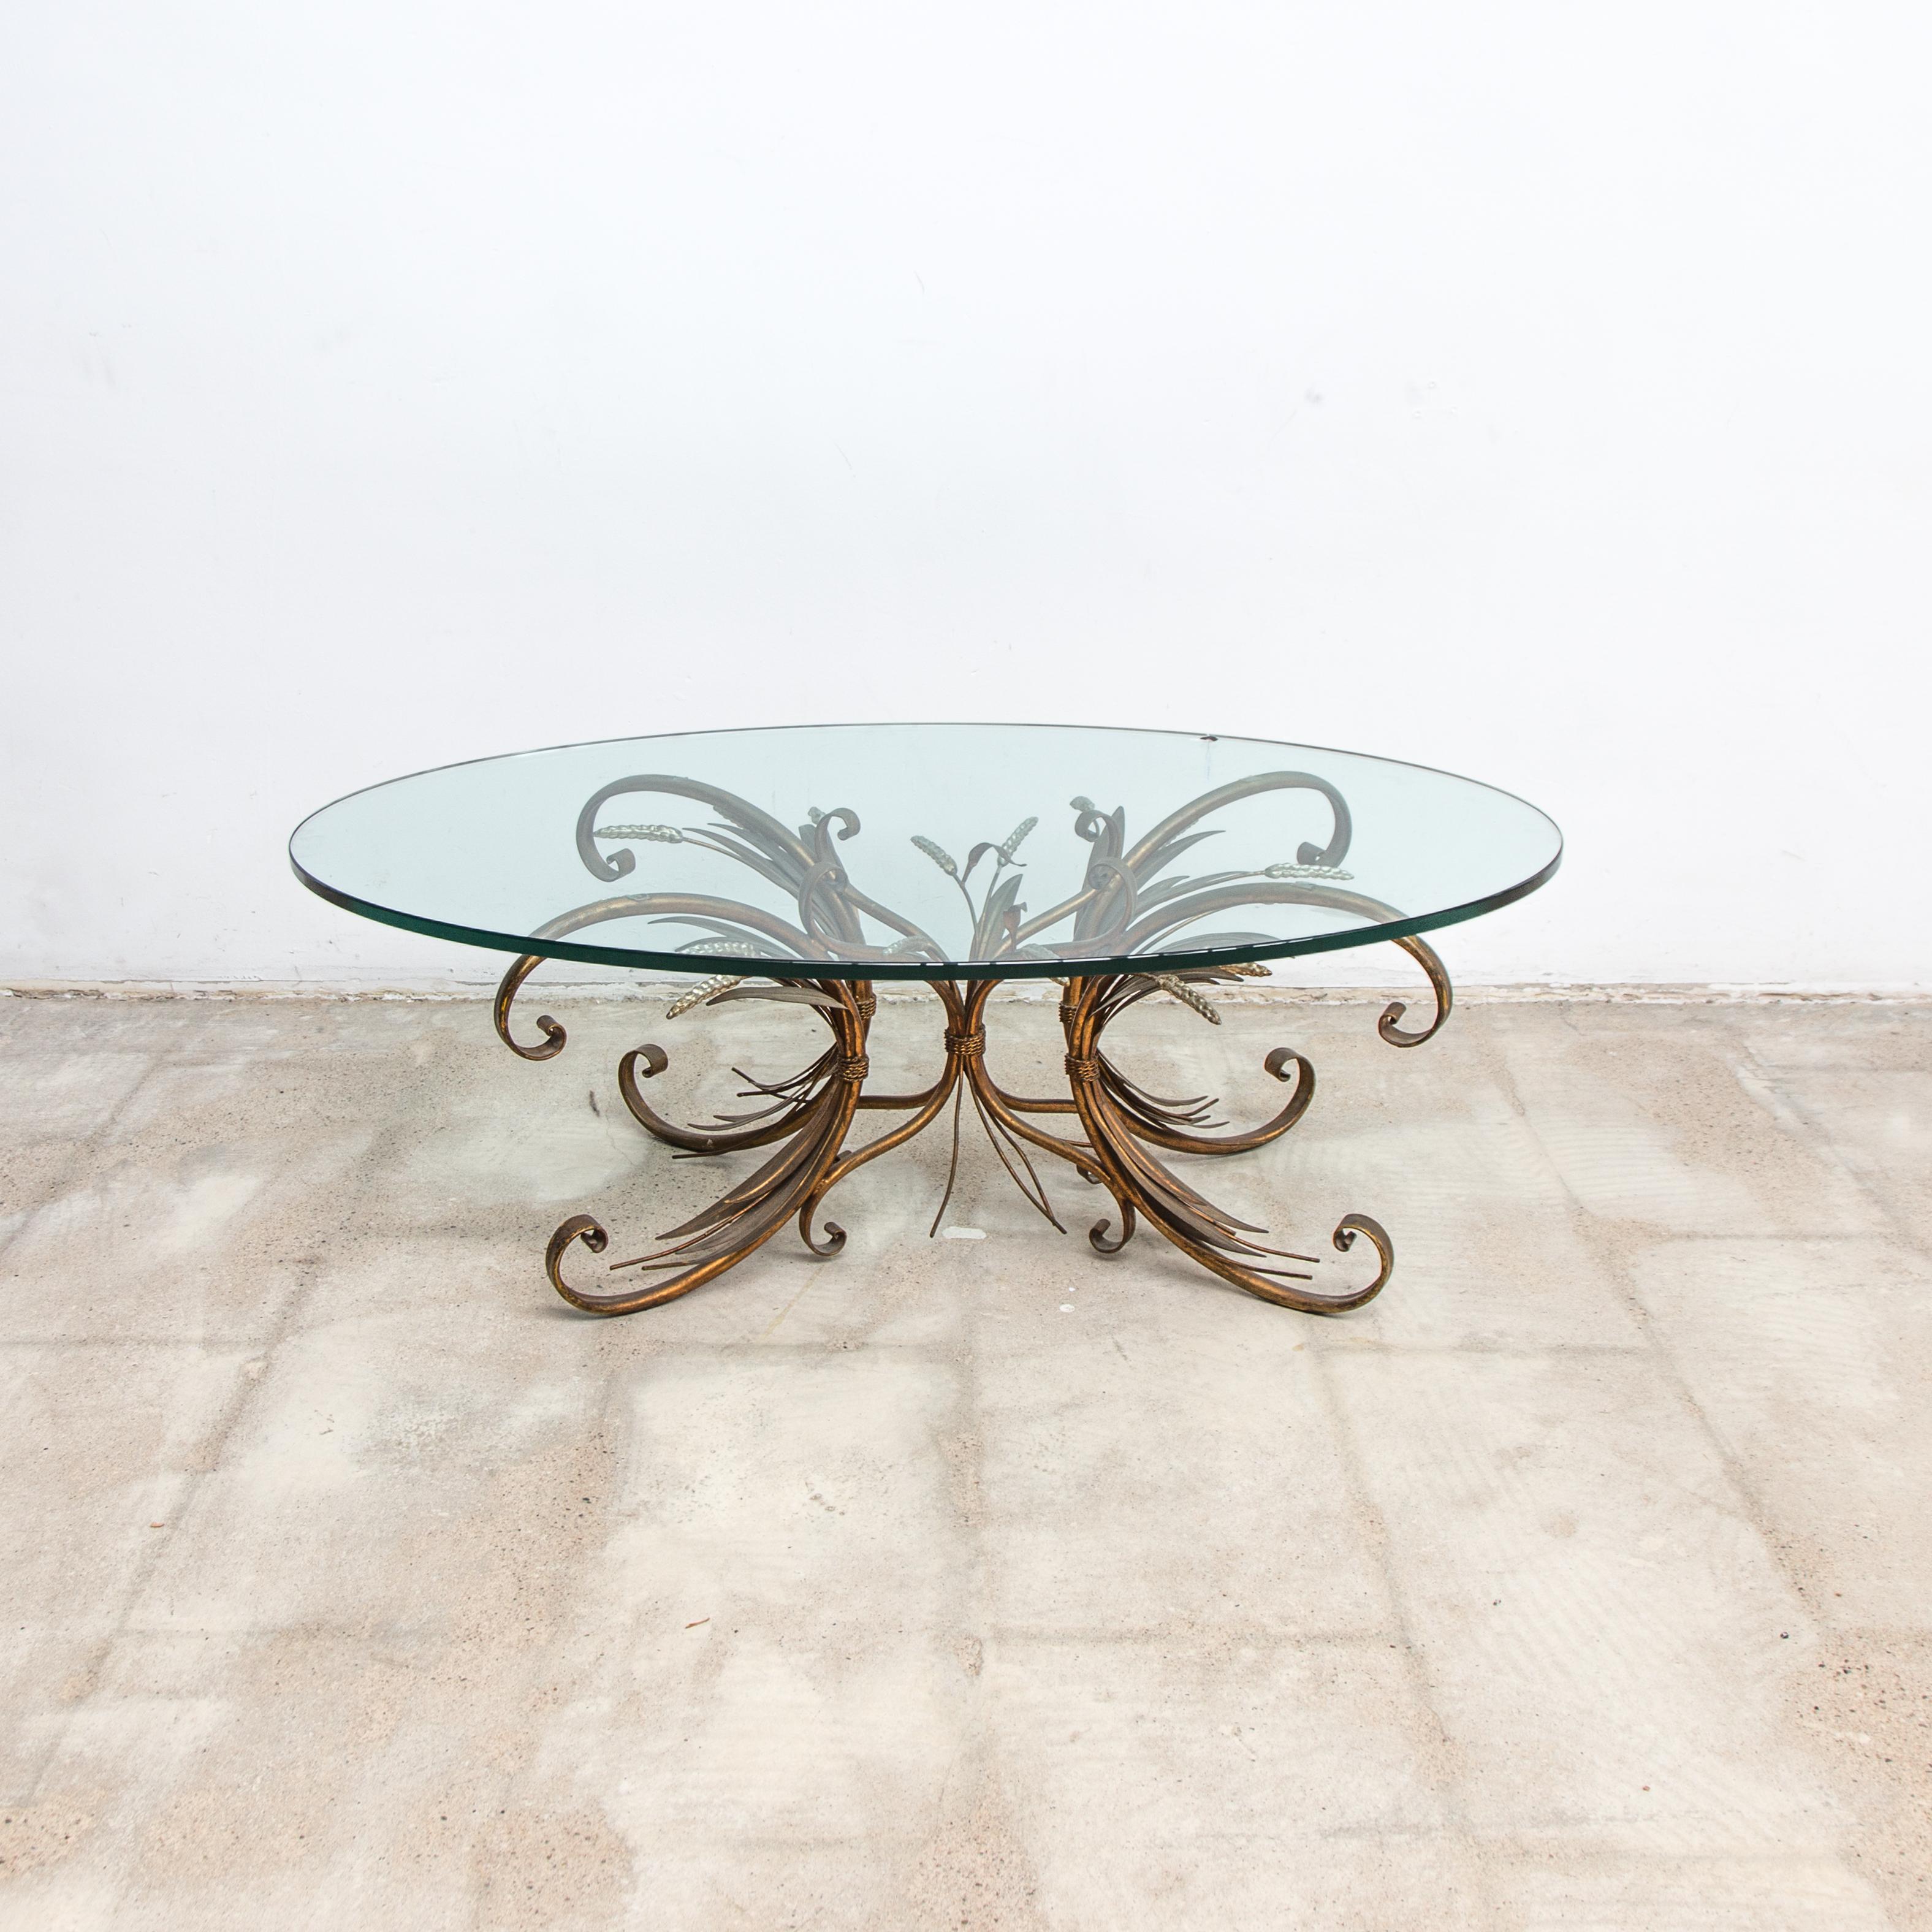 Coco Chanel French coffee table, sheaf of wheat with rare oval glass, 1950s. This wheat sheaf side or table is decorative and has a French origin. The frame holds a patina to the brass surface and the silver finished wheat tops. The table comes with